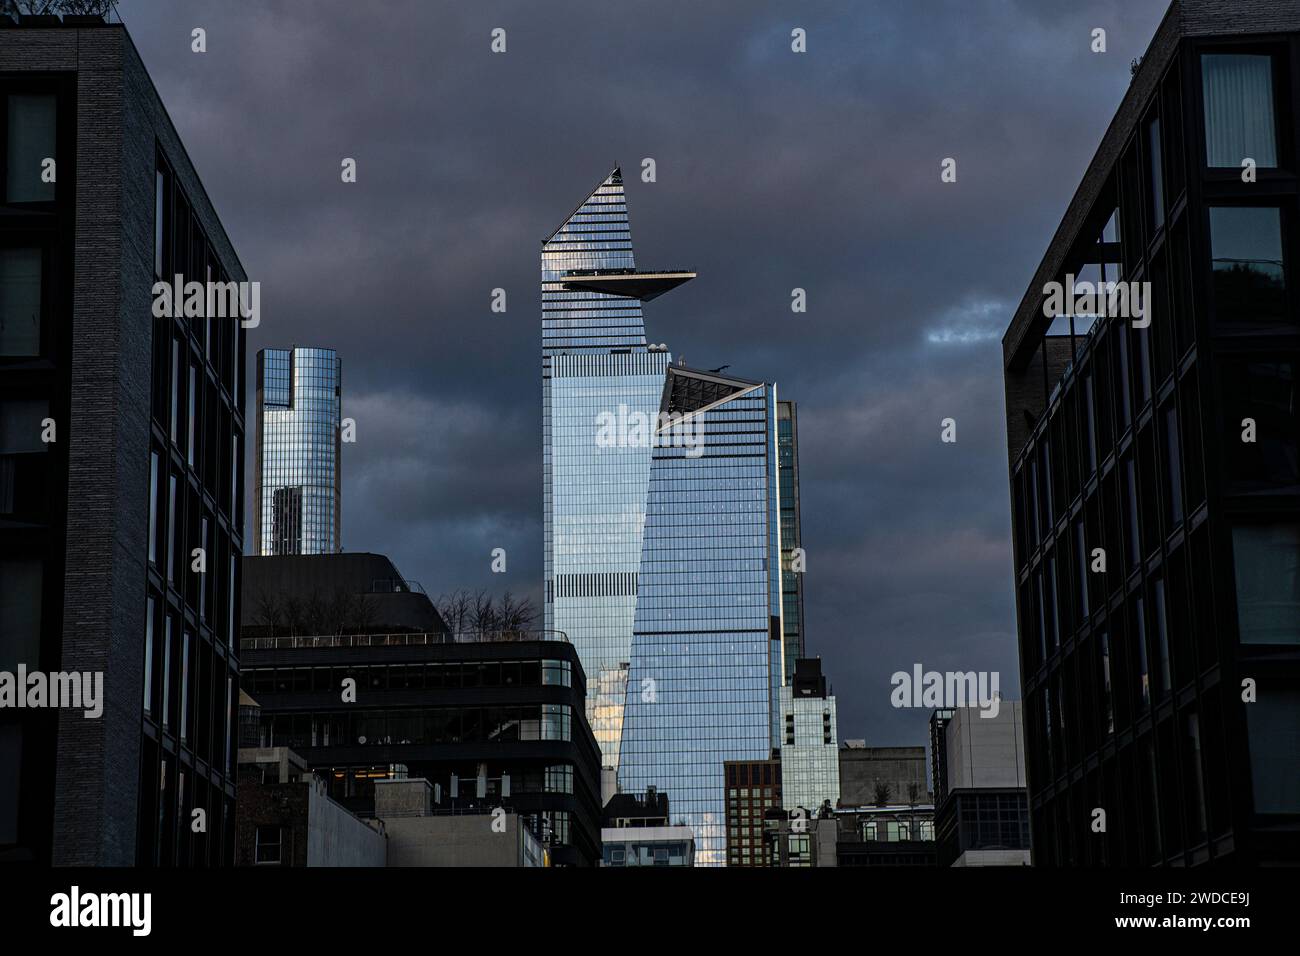 Cityscape with dramatic sky, view looking north from Chelsea neighborhood to 10 Hudson Yards and 30 Hudson Yards, New York City, New York, USA Stock Photo